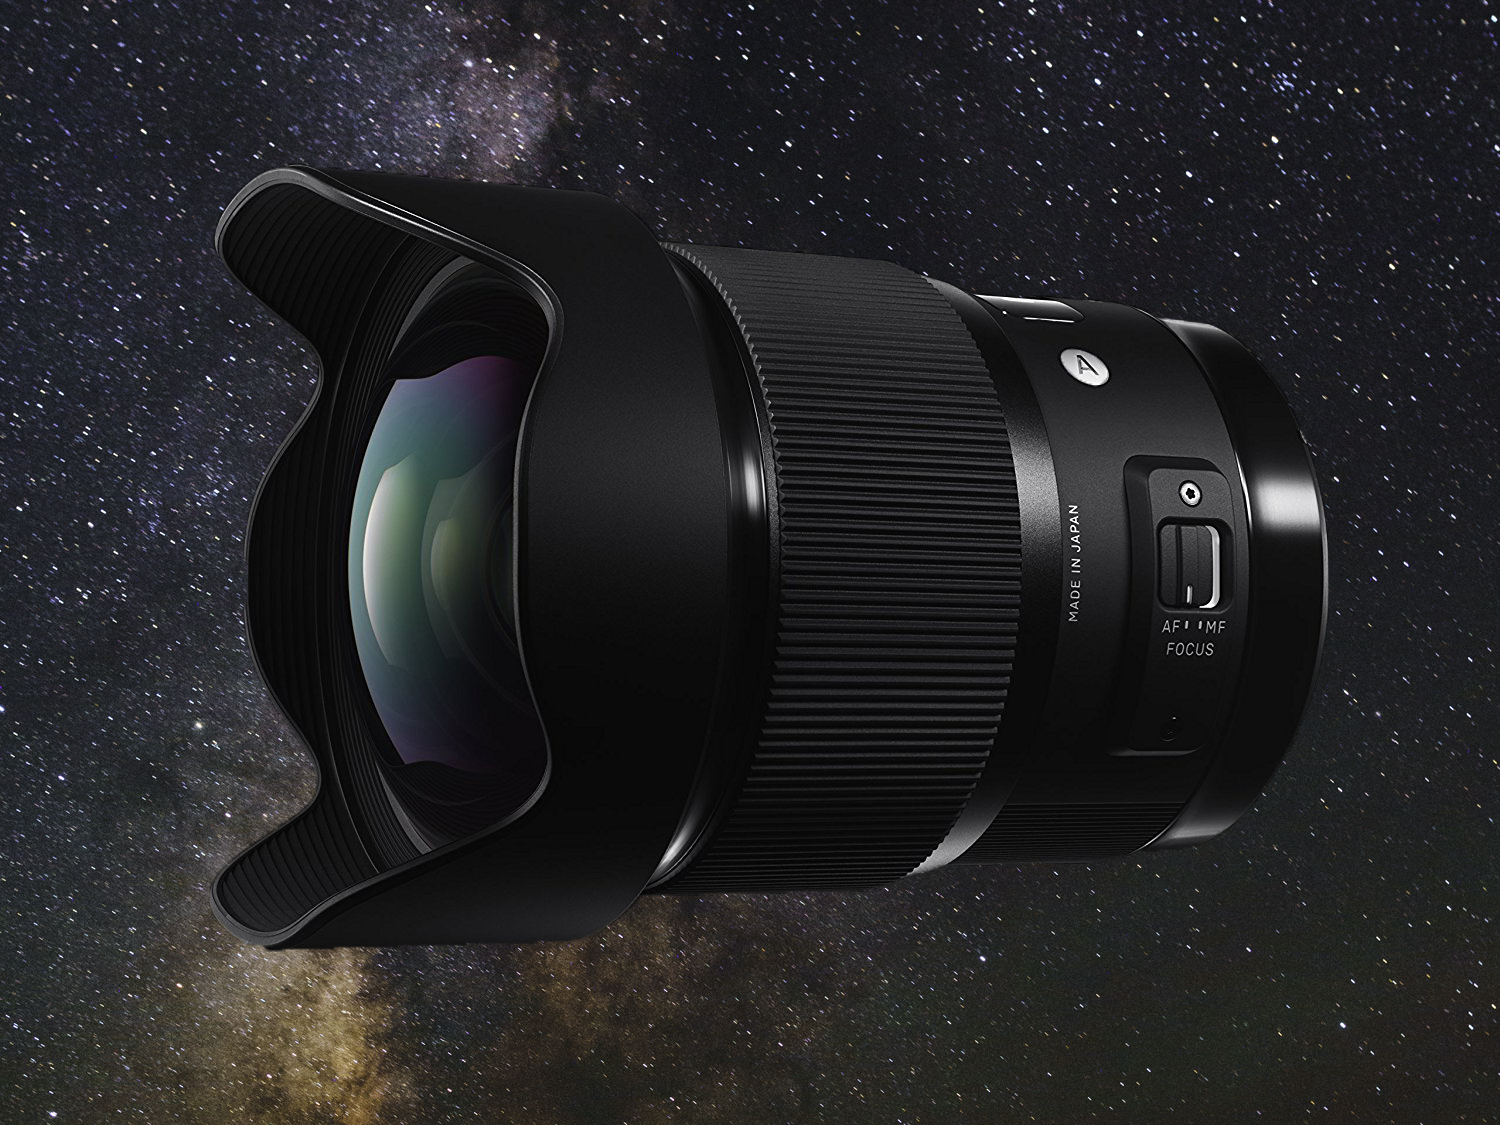 best canon lens for star photography